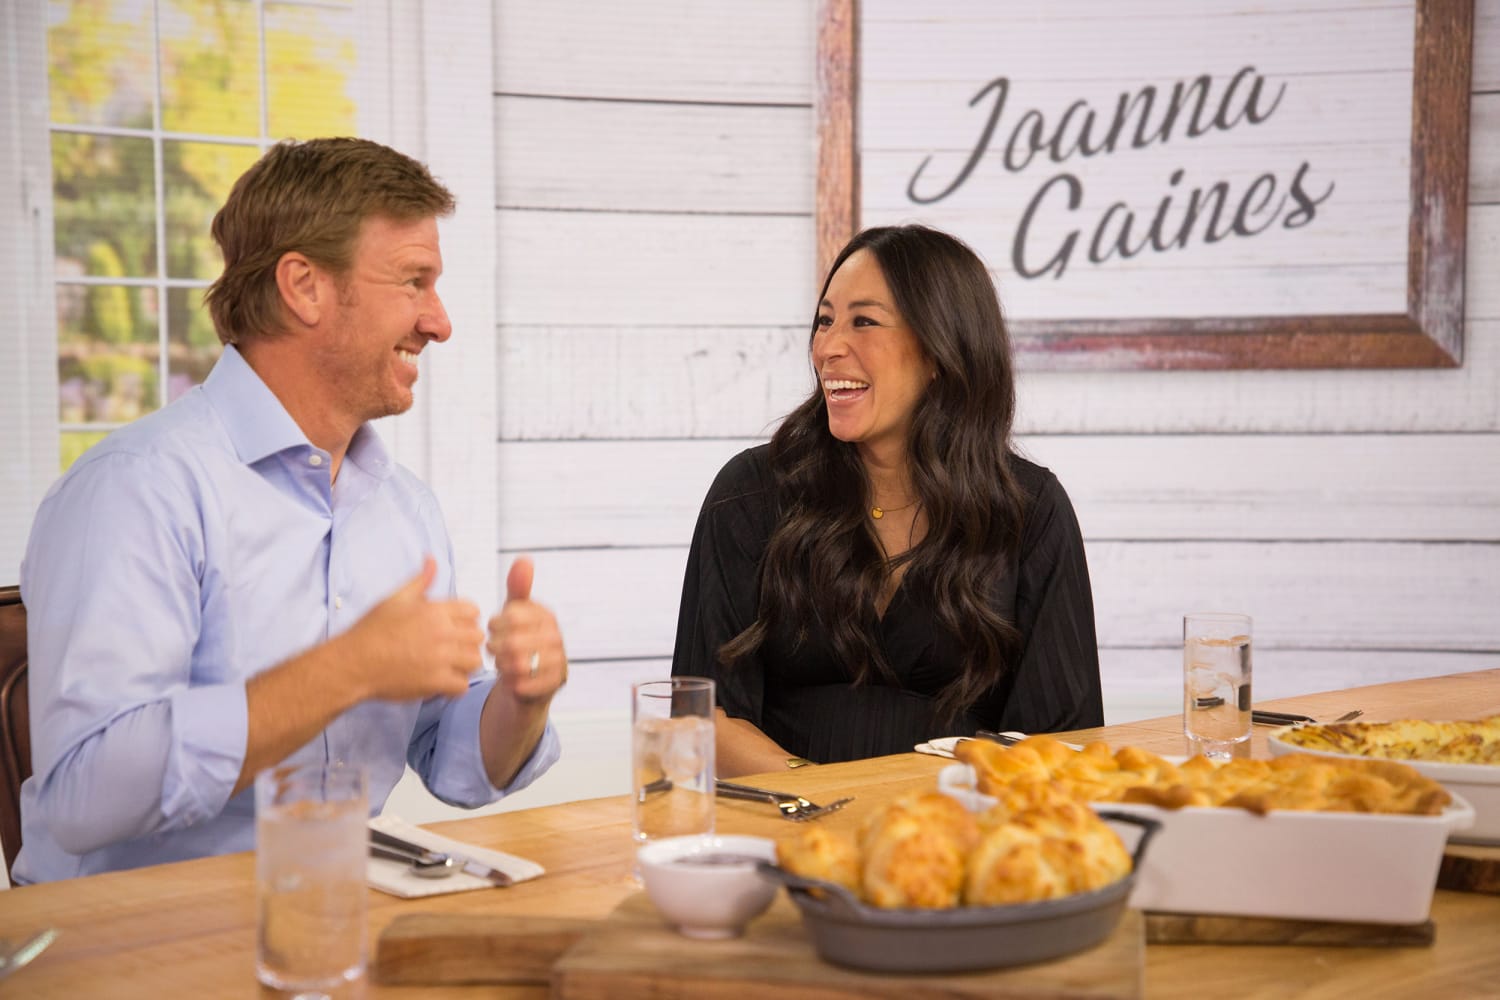 Joanna gaines biscuits and gravy